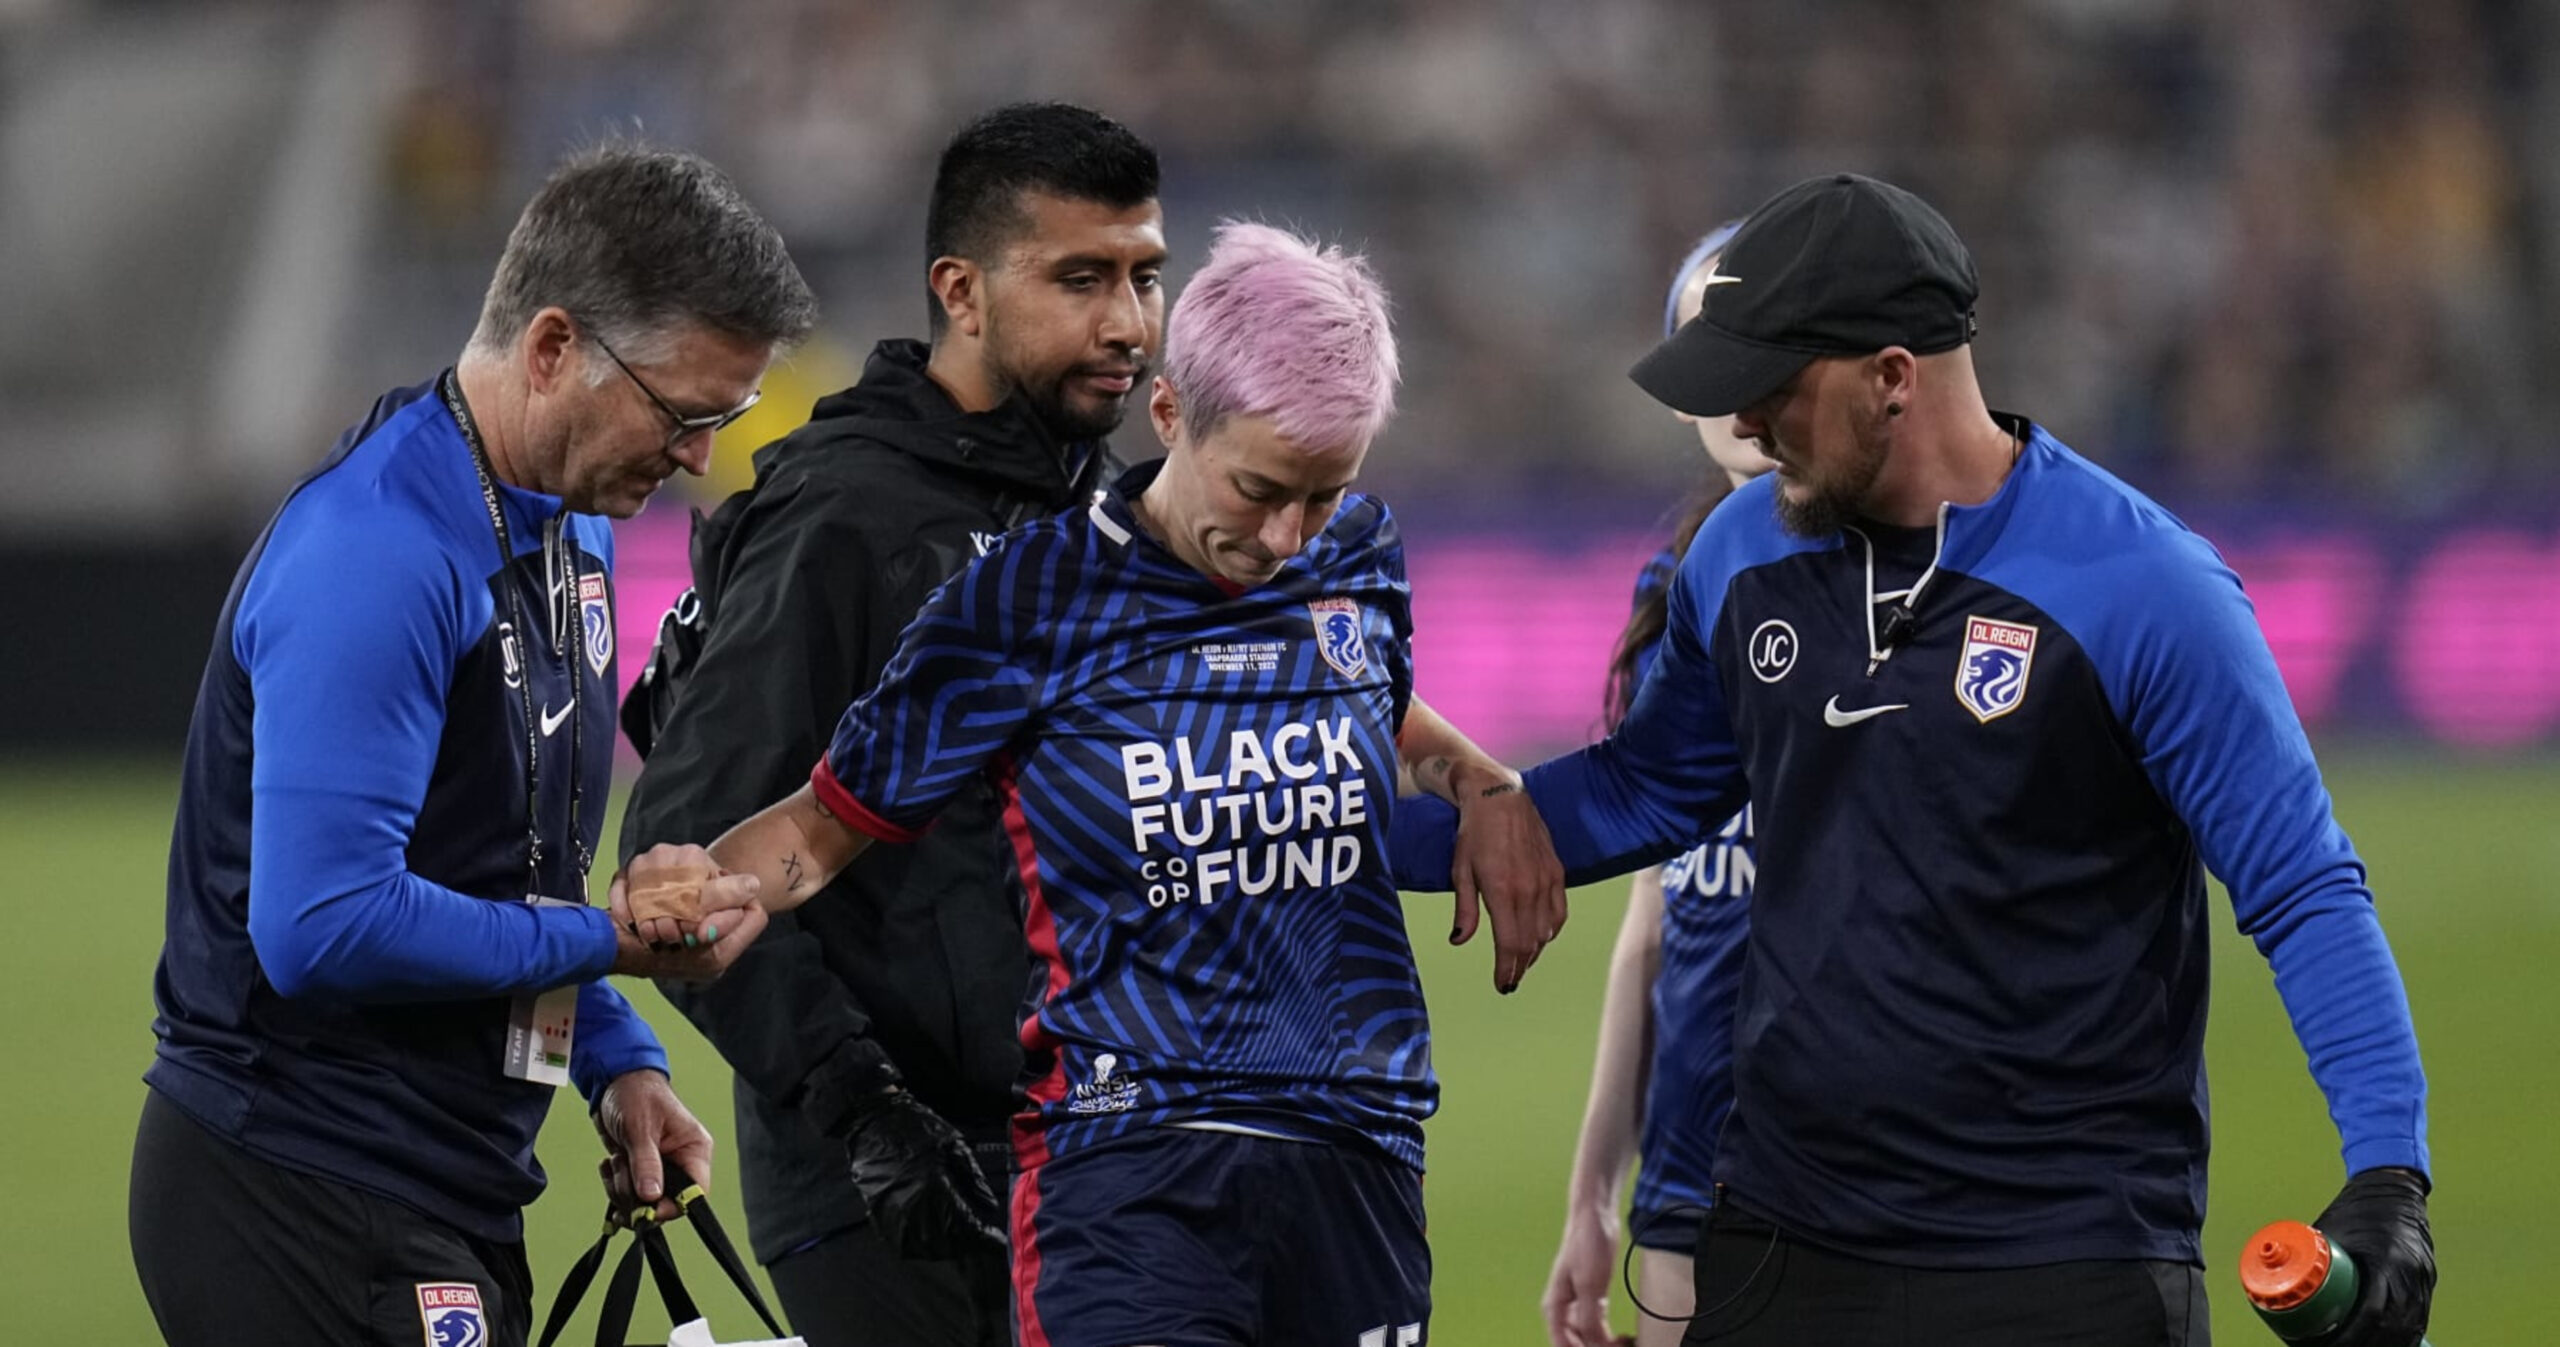 USWNT’s Megan Rapinoe Has Surgery for Torn Achilles Injury Suffered in Final Match